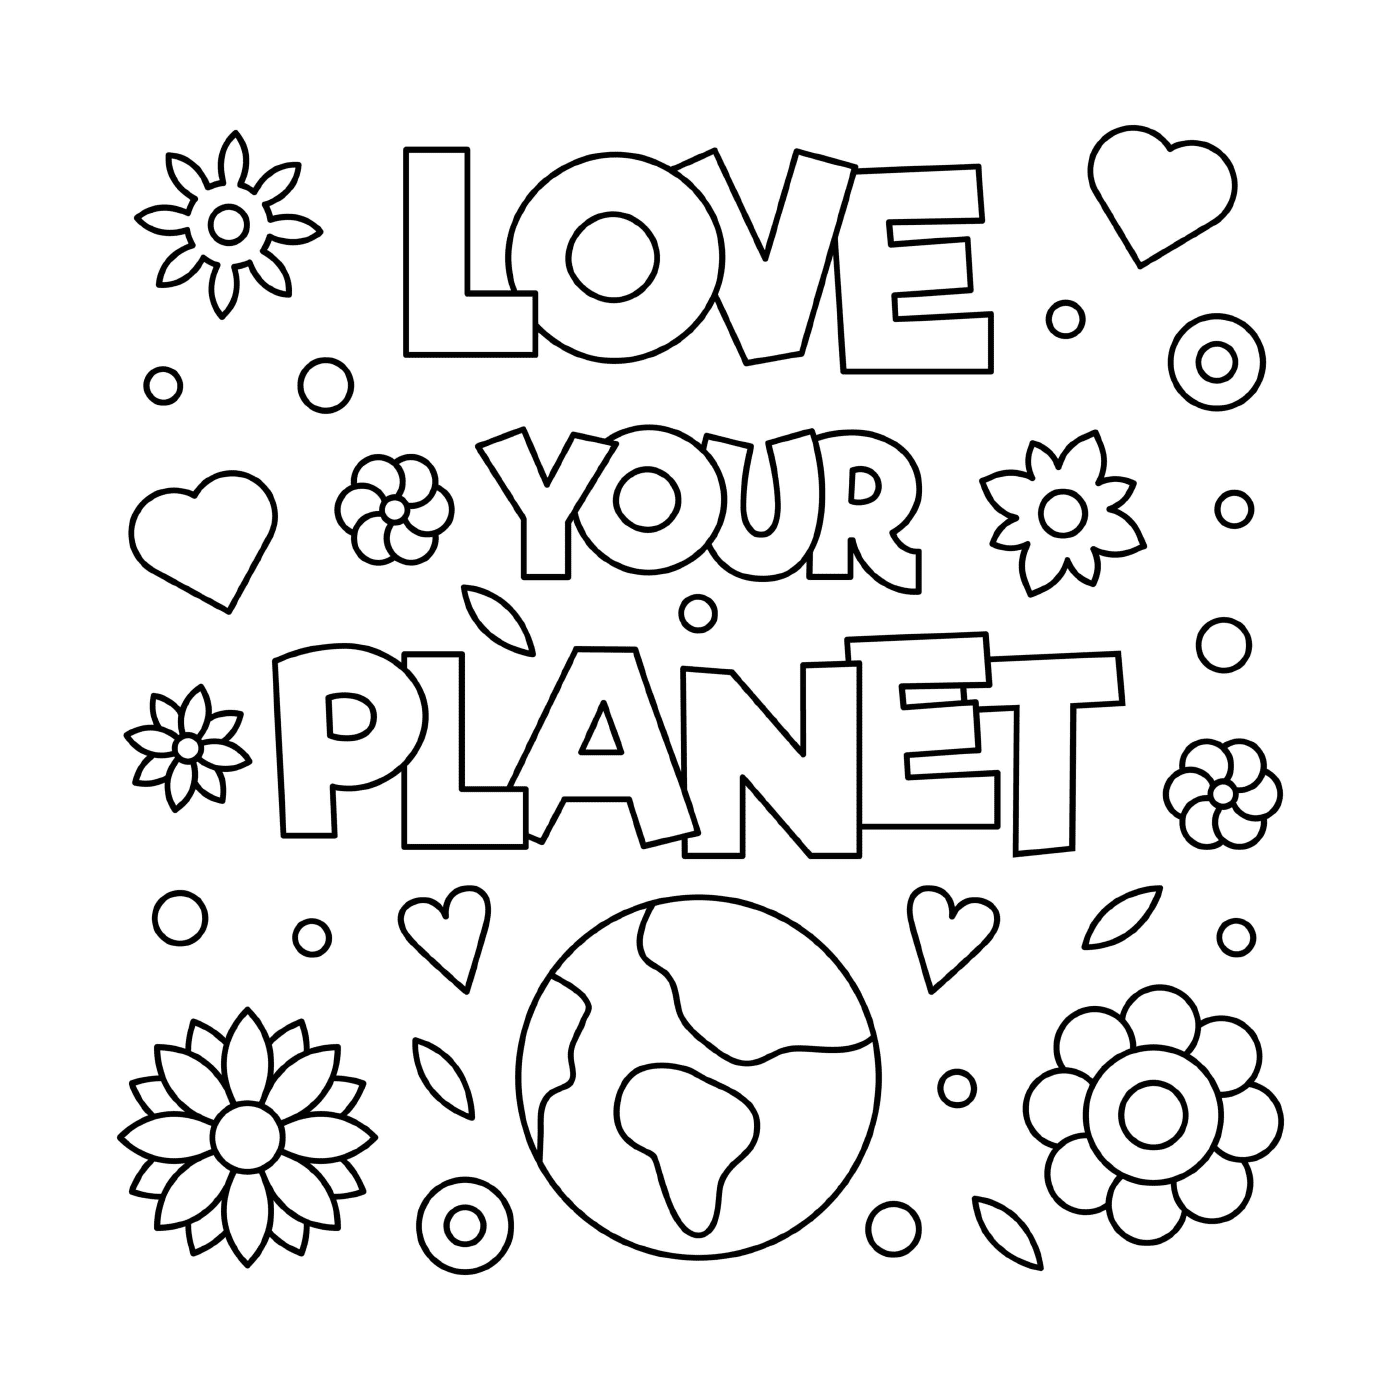  Love your planet for Earth Day 